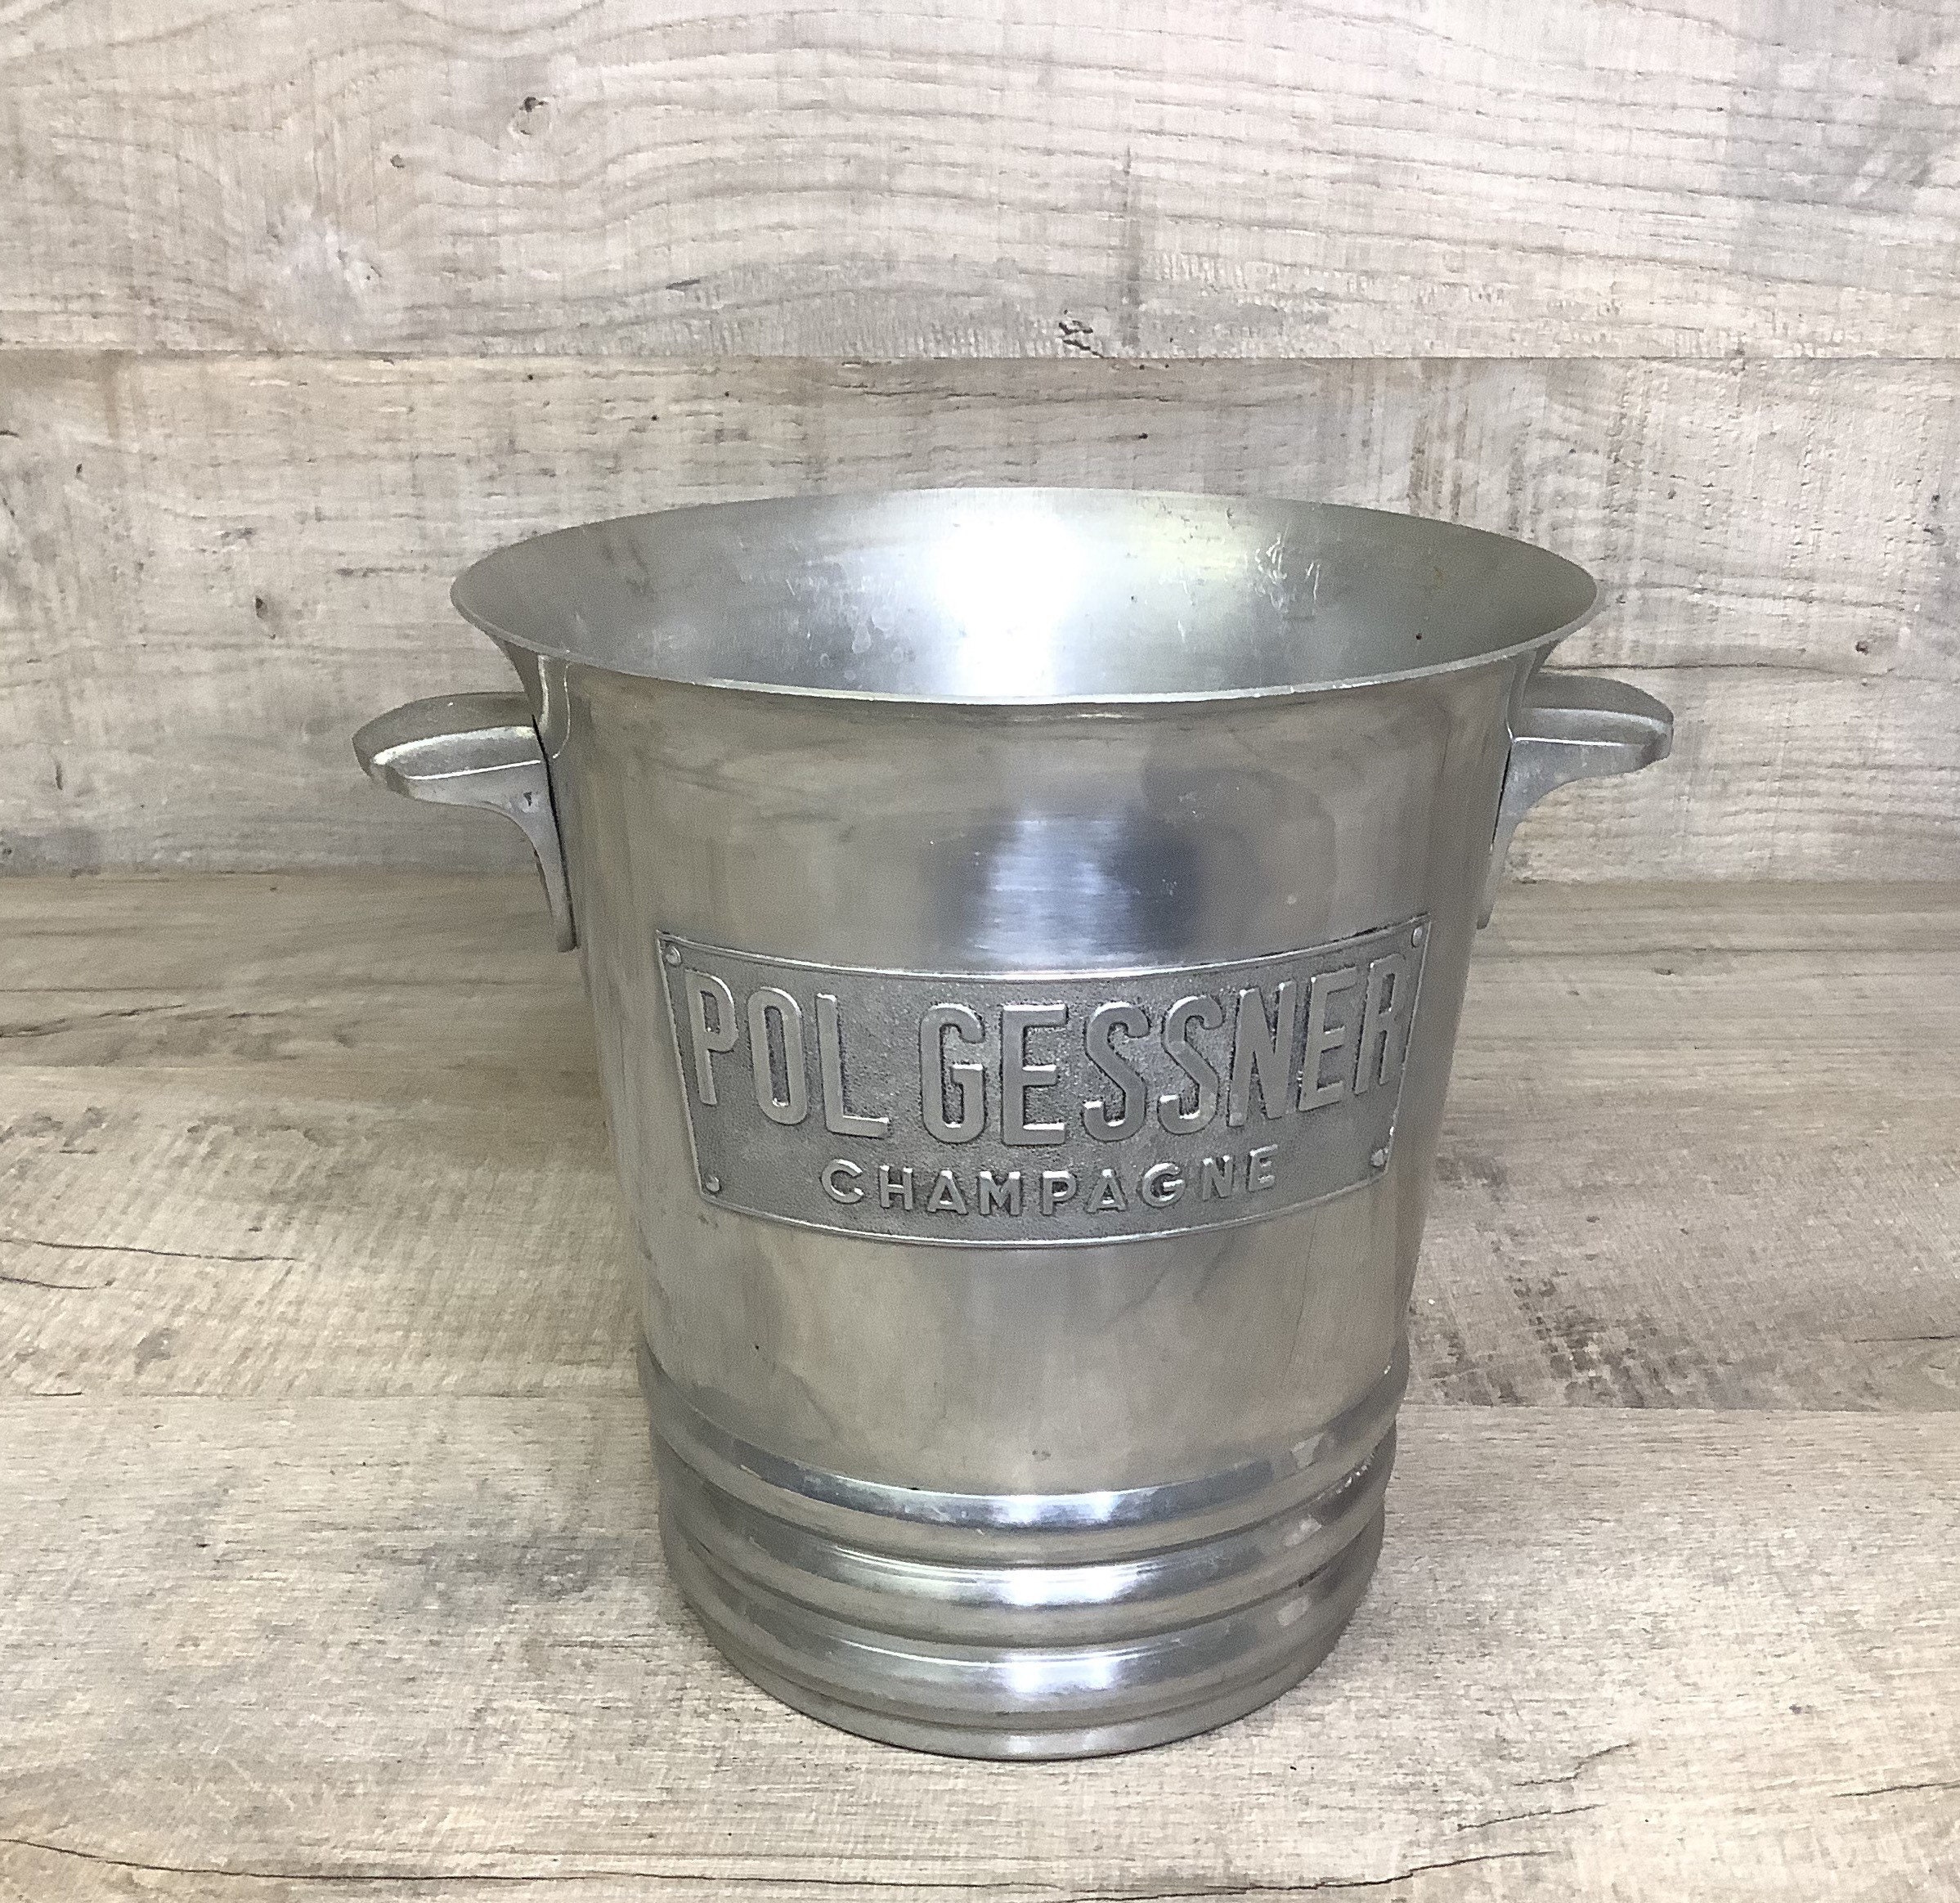 Seau à Champagne Pol Guessner/Champagne Ice Bucket From Cooler Vintage Made in France